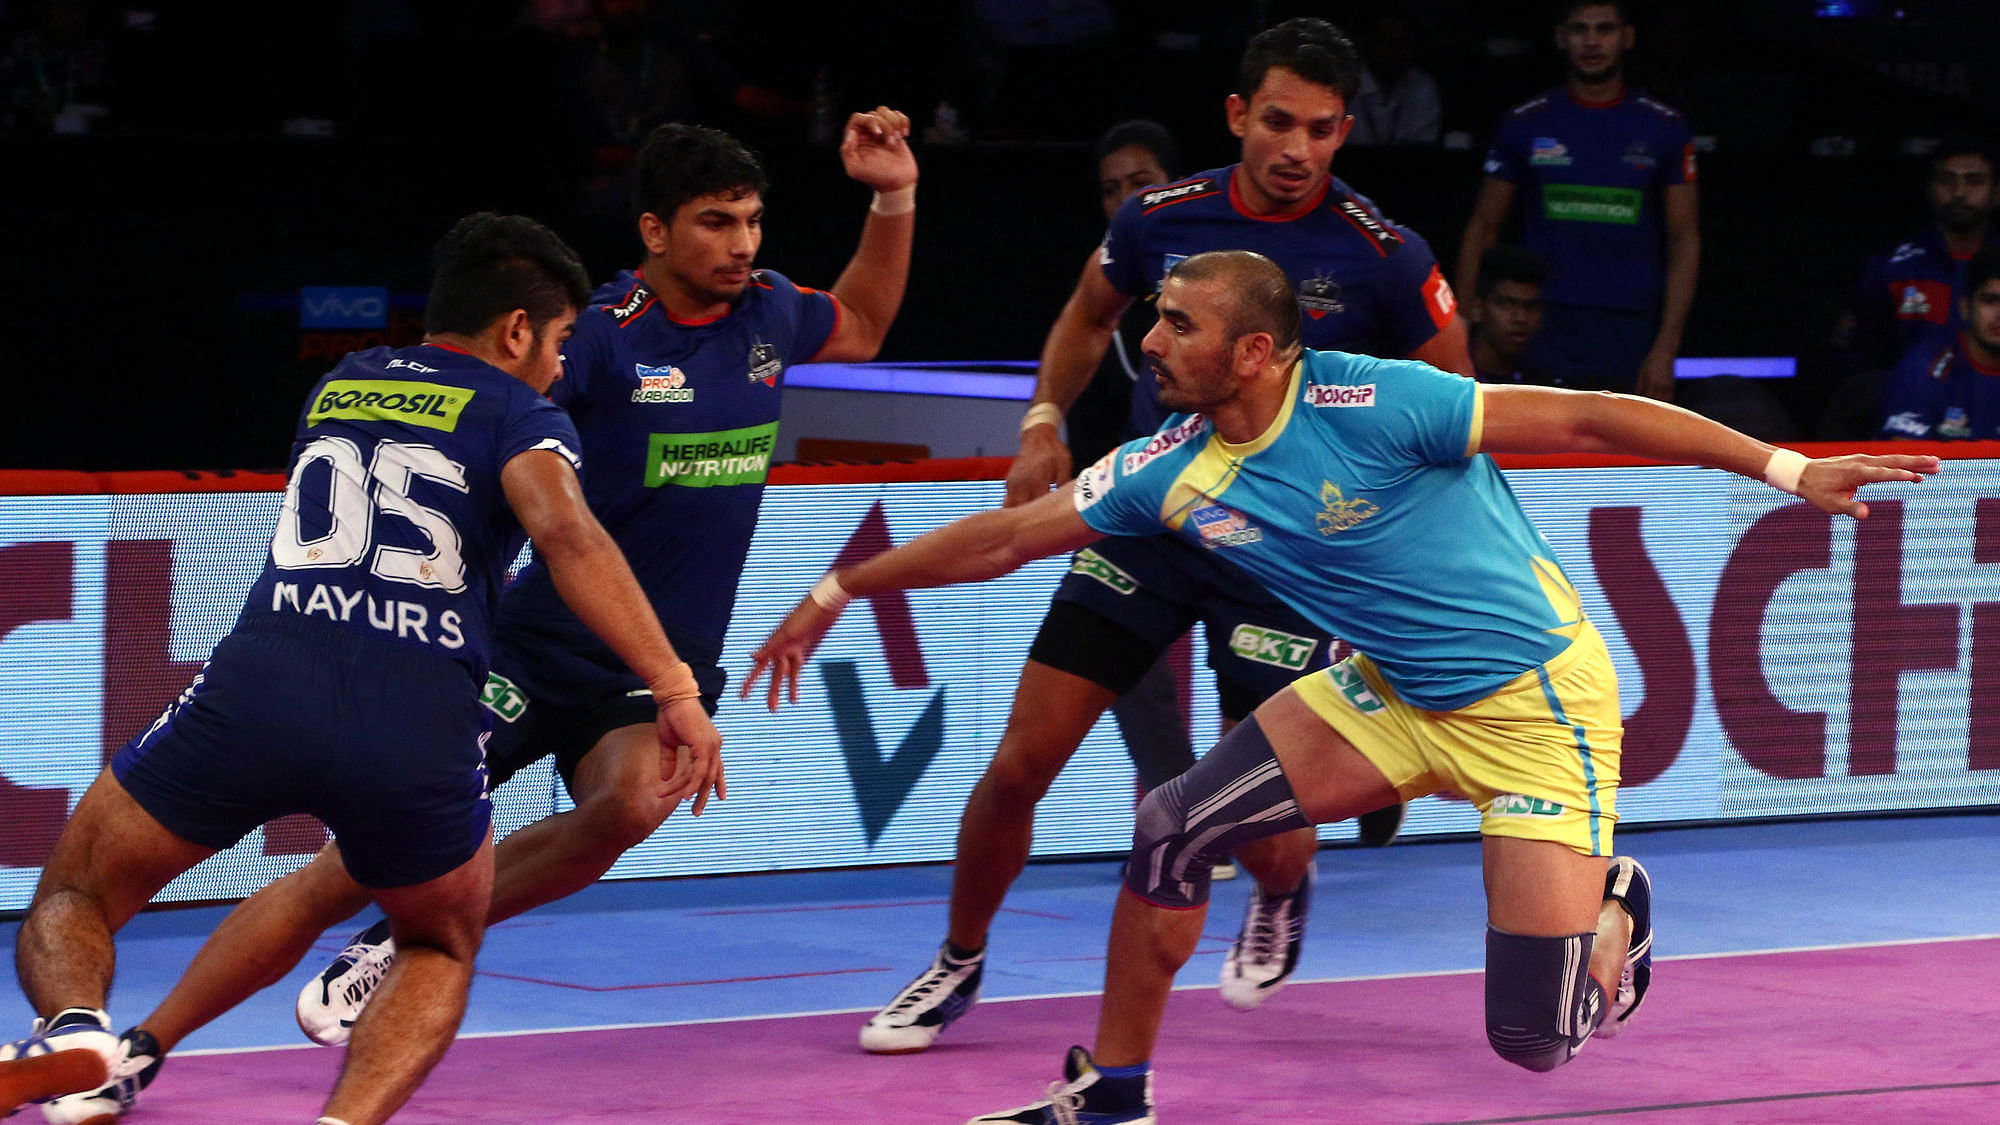 Haryana Steelers and Tamil Thalaivas played out a thrilling 32-32 tie in Inter Zone Challenge Week of the Pro Kabaddi.